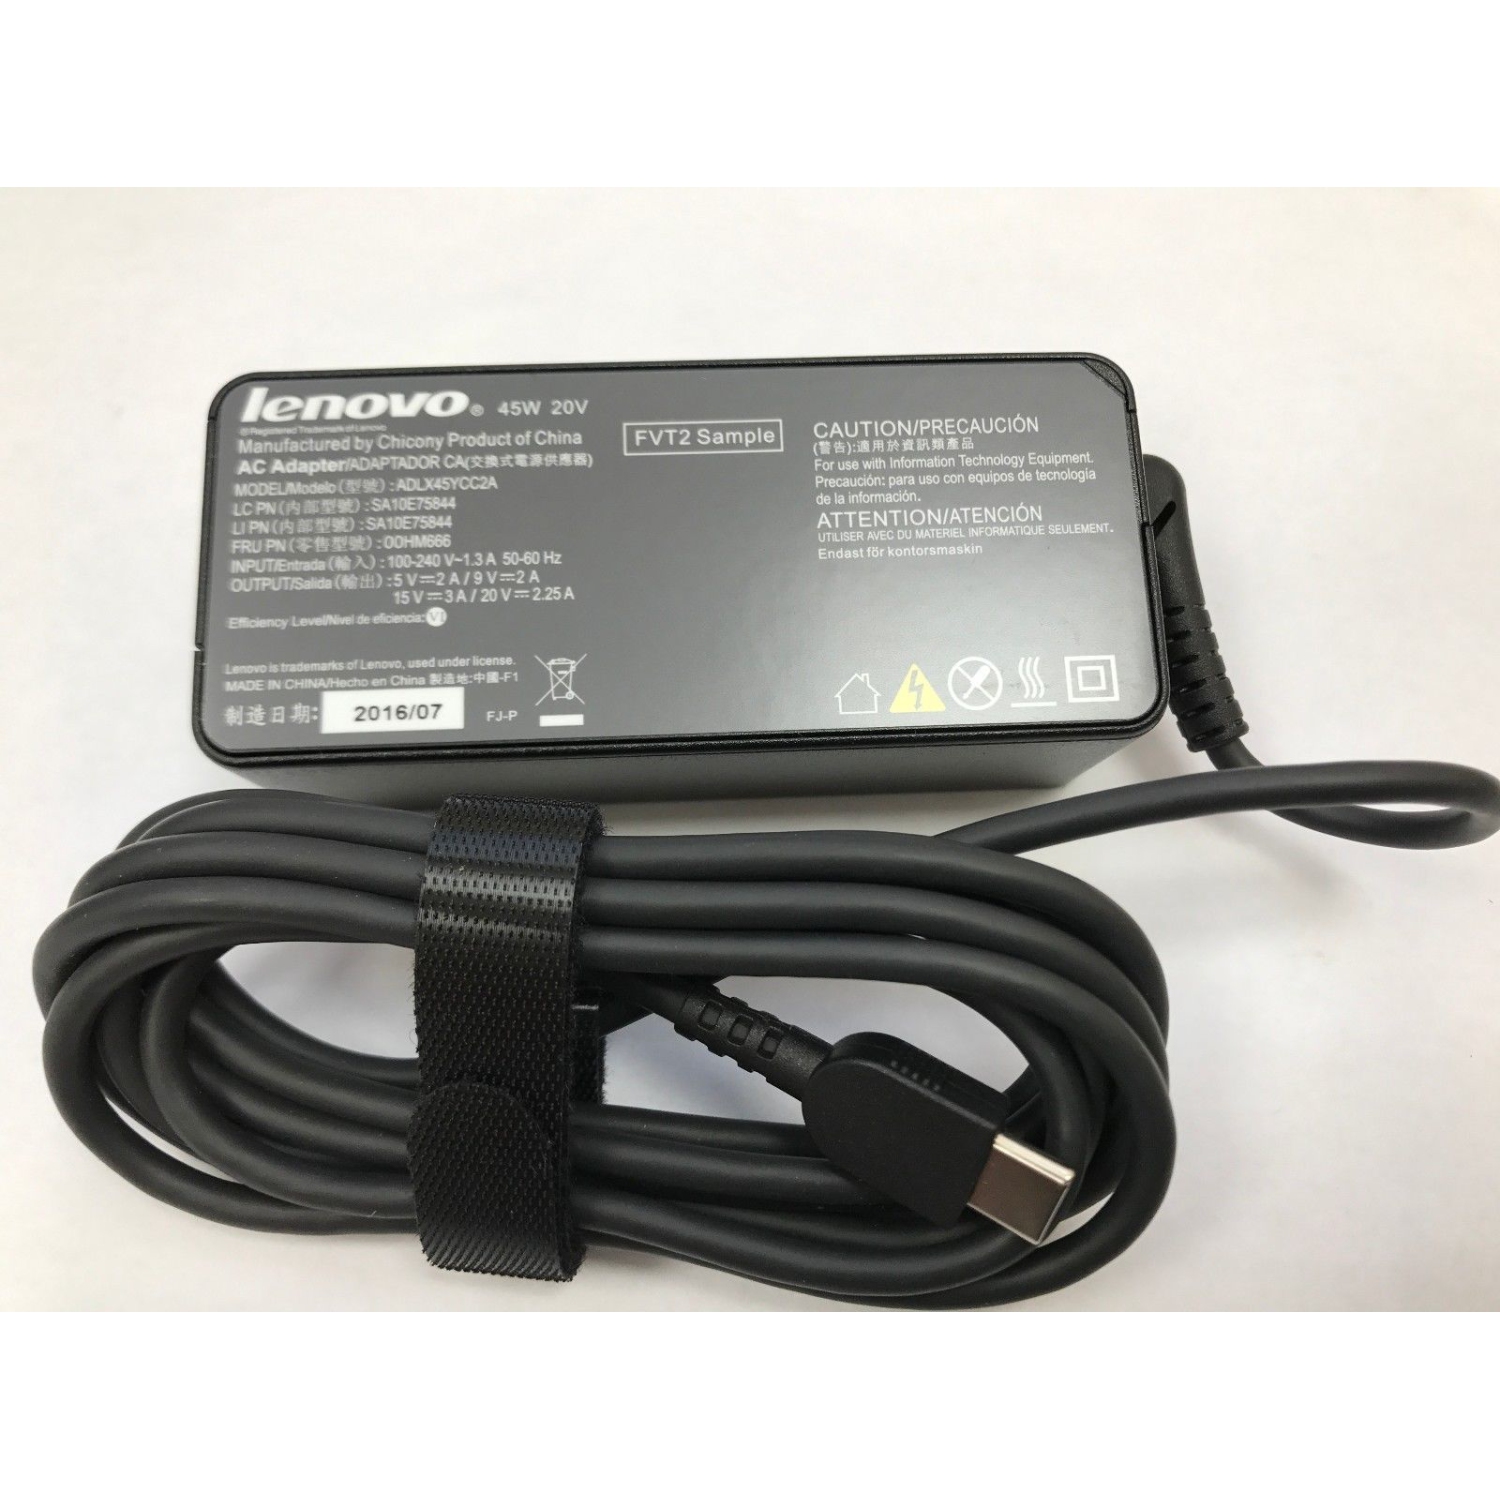 New Genuine Lenovo Yoga 5 Pro Tablet USB-C Type-C AC Adapter Charger 45W